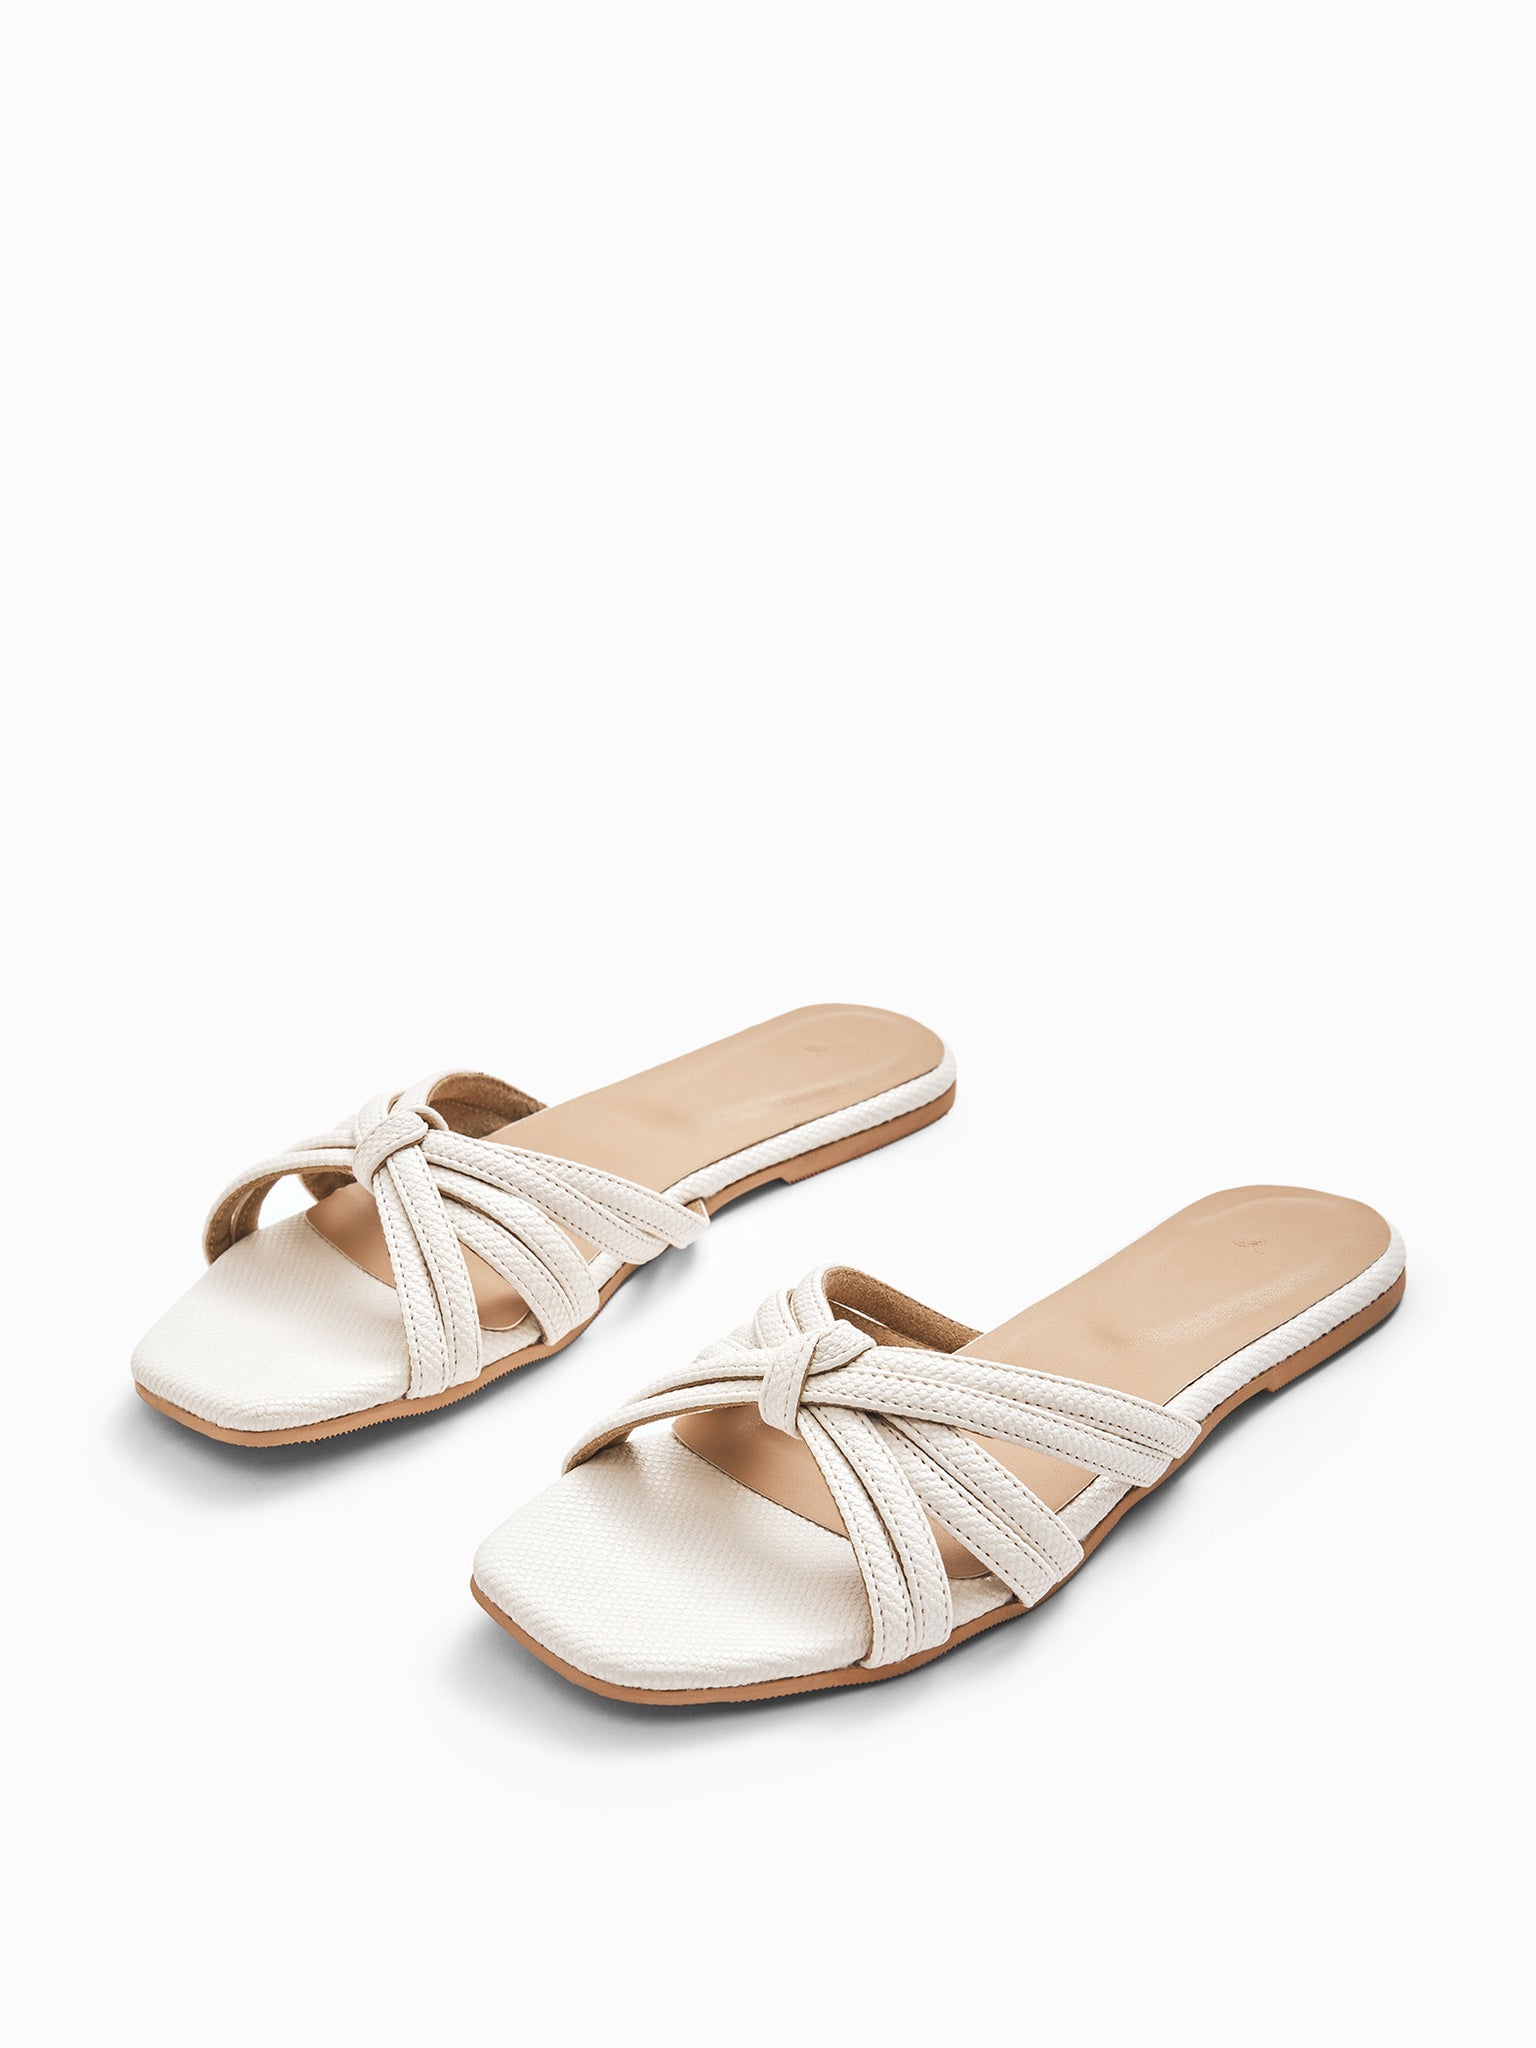 White Knotted Strap Flats